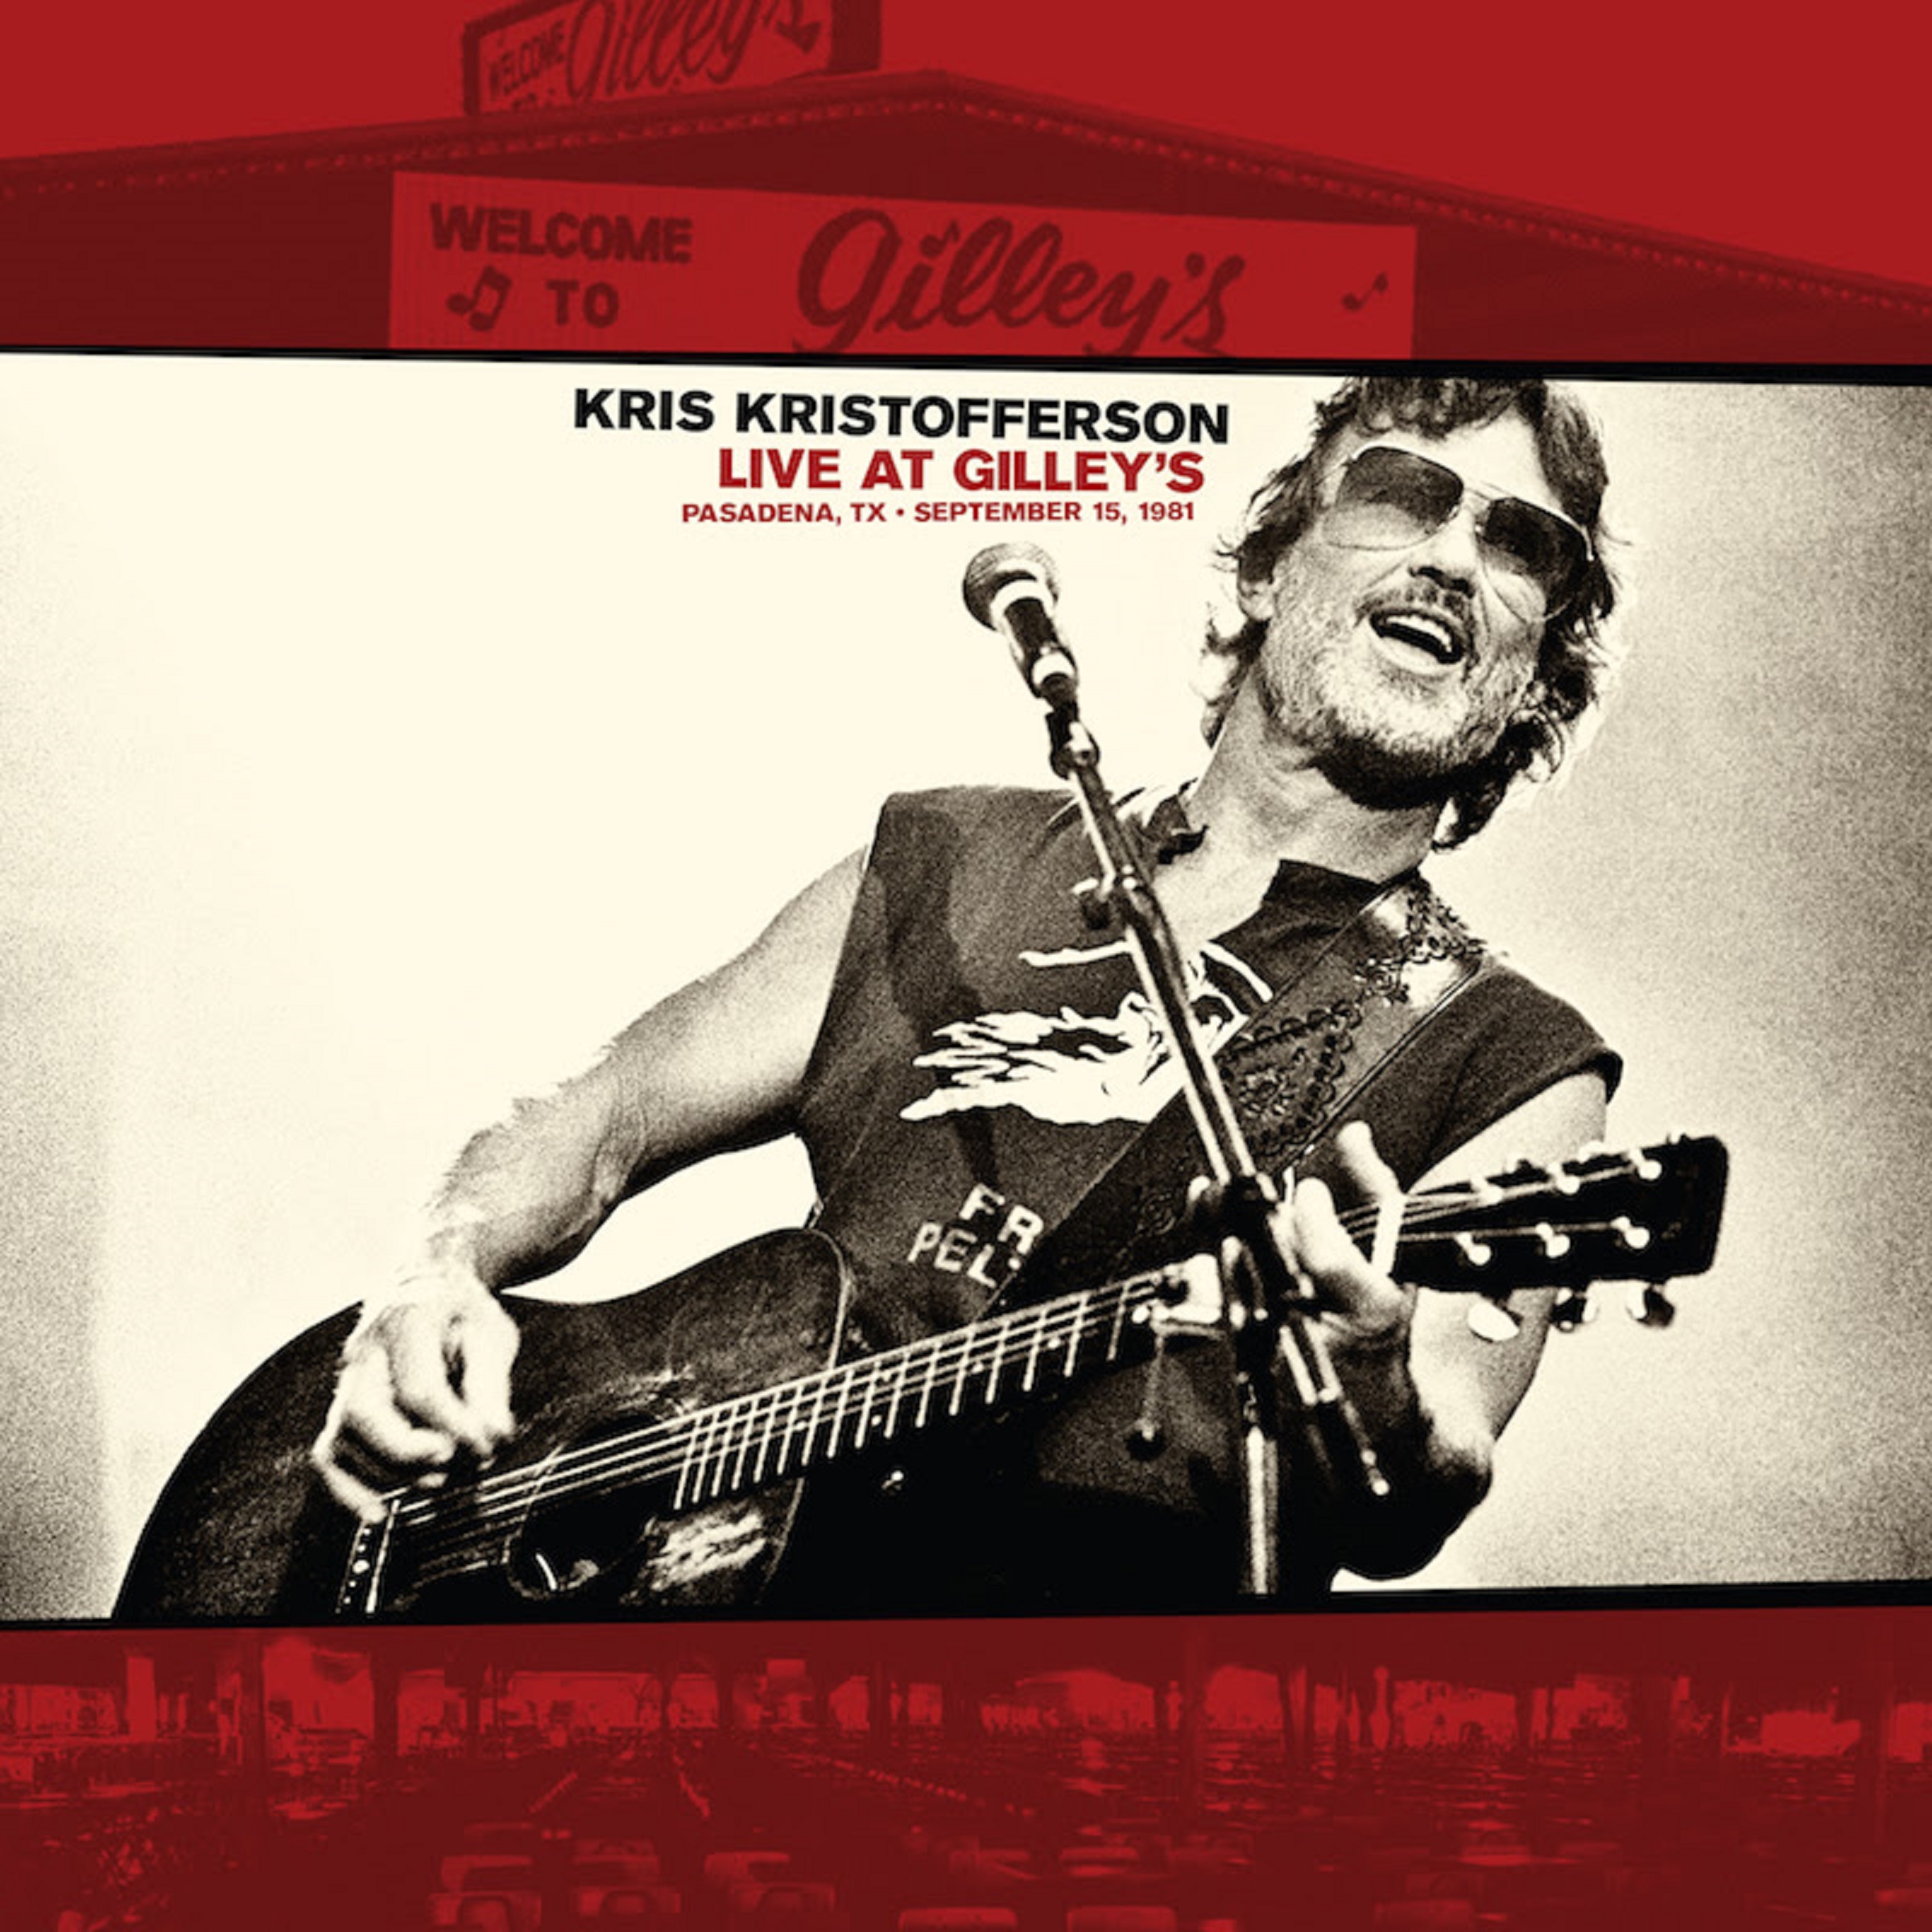 Kris Kristofferson To Release "Live At Gilley's - Pasadena, TX: September 15, 1981" September 2nd Via New West Records